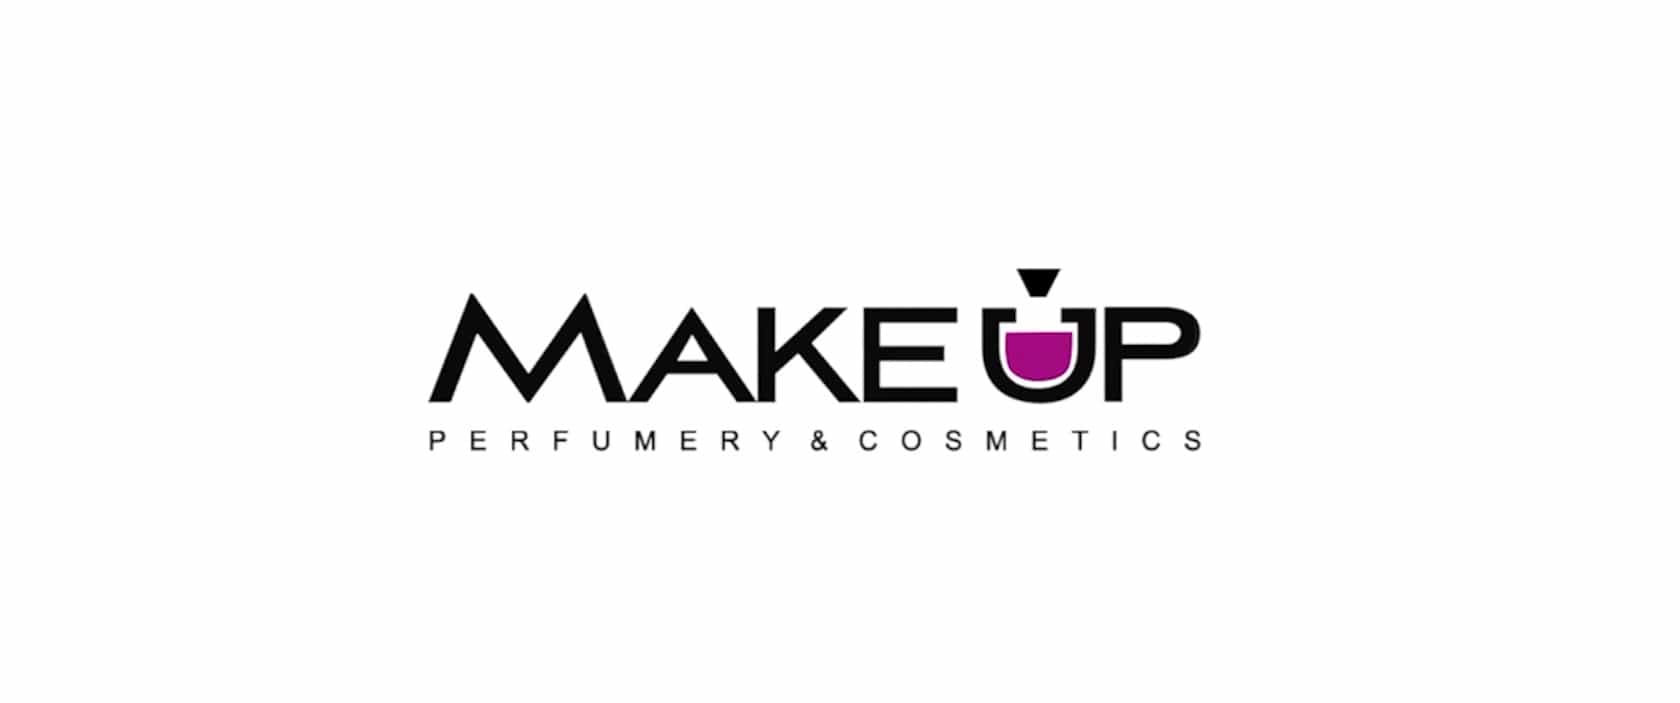 Case video review of cosmetics" Beauty video Make up Grunge"